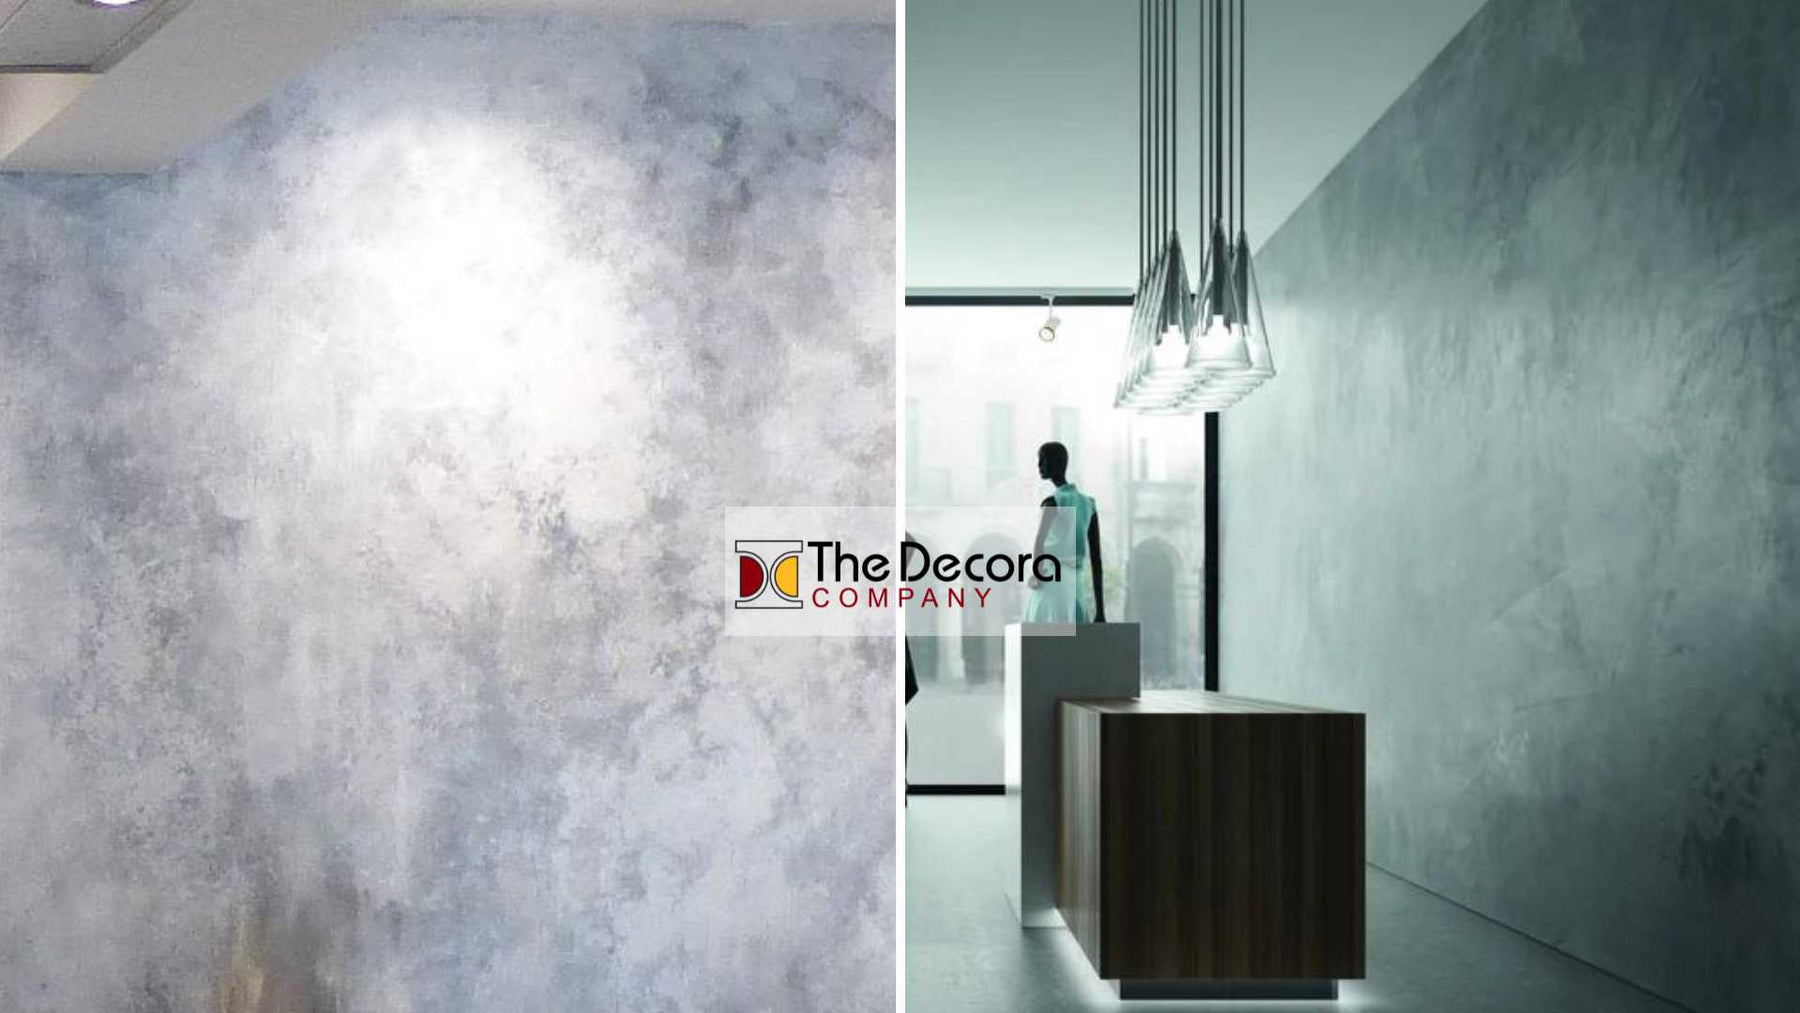 Home Renovation Project - Polished Plaster Wall The Decora Company